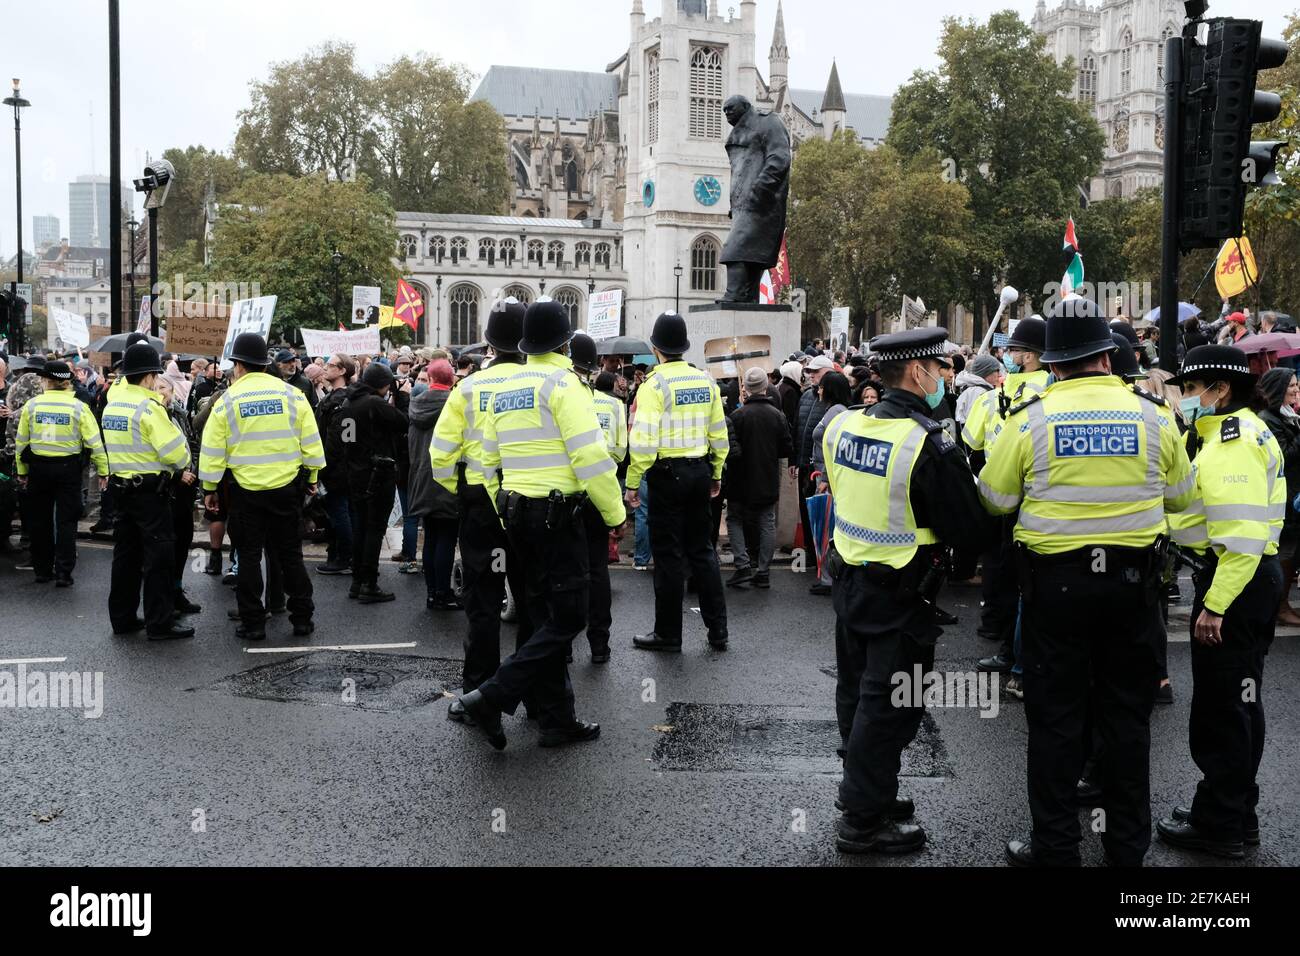 LONDON, 24TH OCTOBER 2020: Anti lockdown protest in central London in response to the governments further lockdown restrictions regarding the virus. Stock Photo